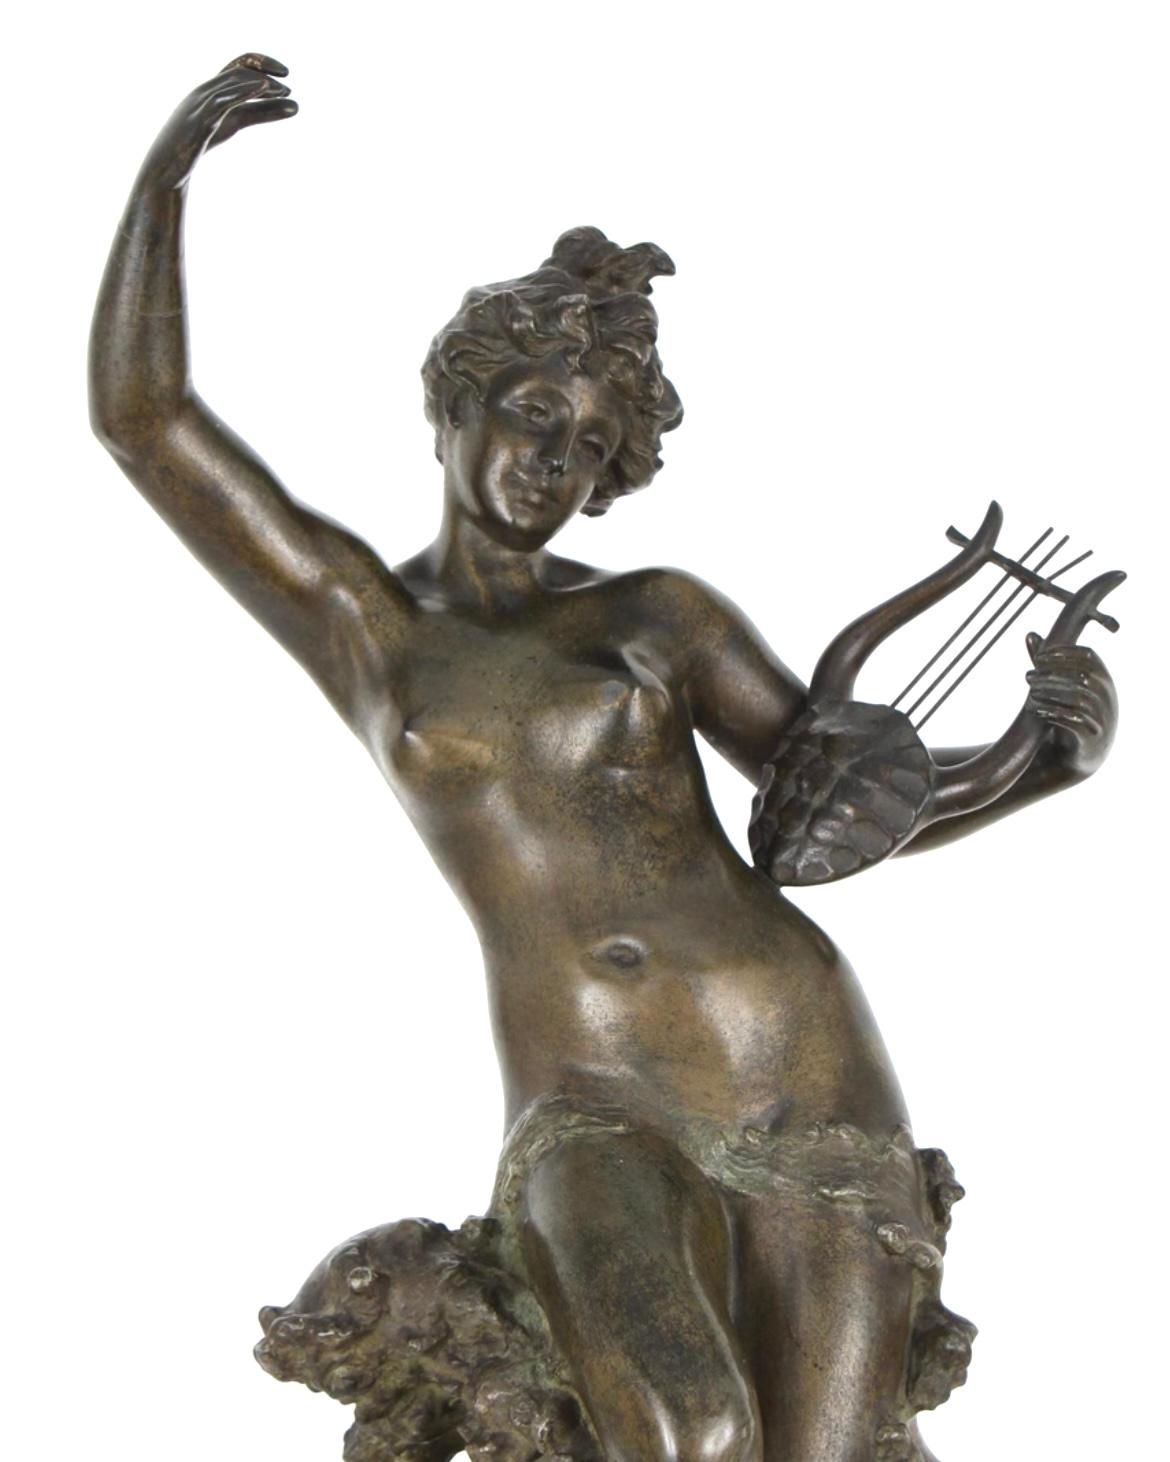 French patinated Bronze figure of a sea nymph after the original by Gustavo Obiols (1858-1910) exhibited at the Paris Salon of 1896.